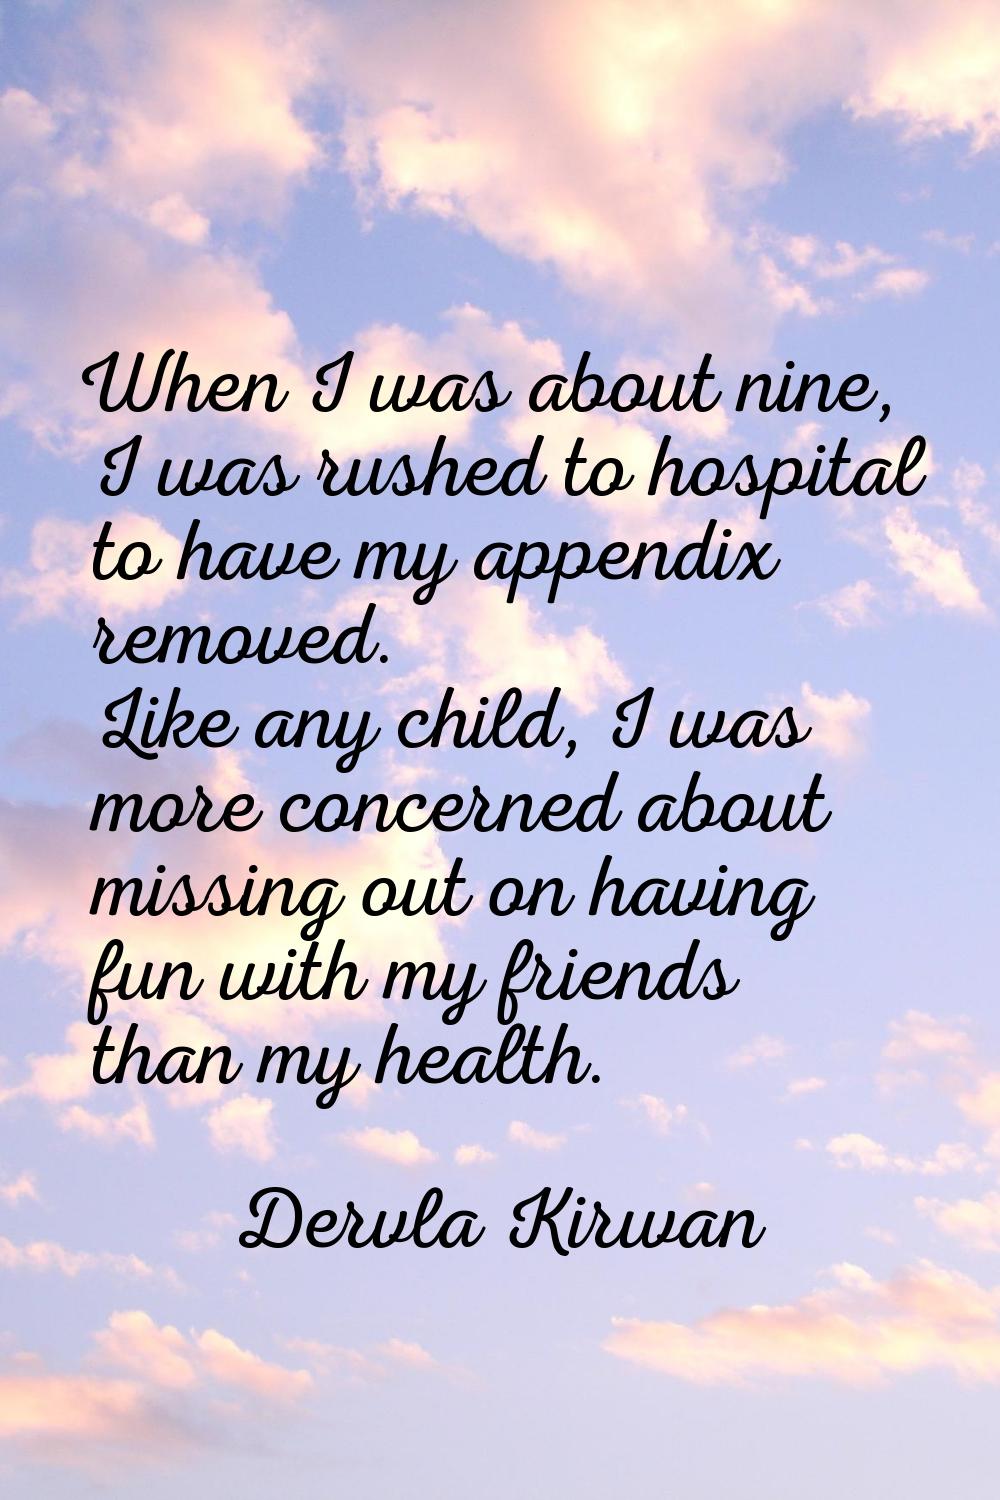 When I was about nine, I was rushed to hospital to have my appendix removed. Like any child, I was 